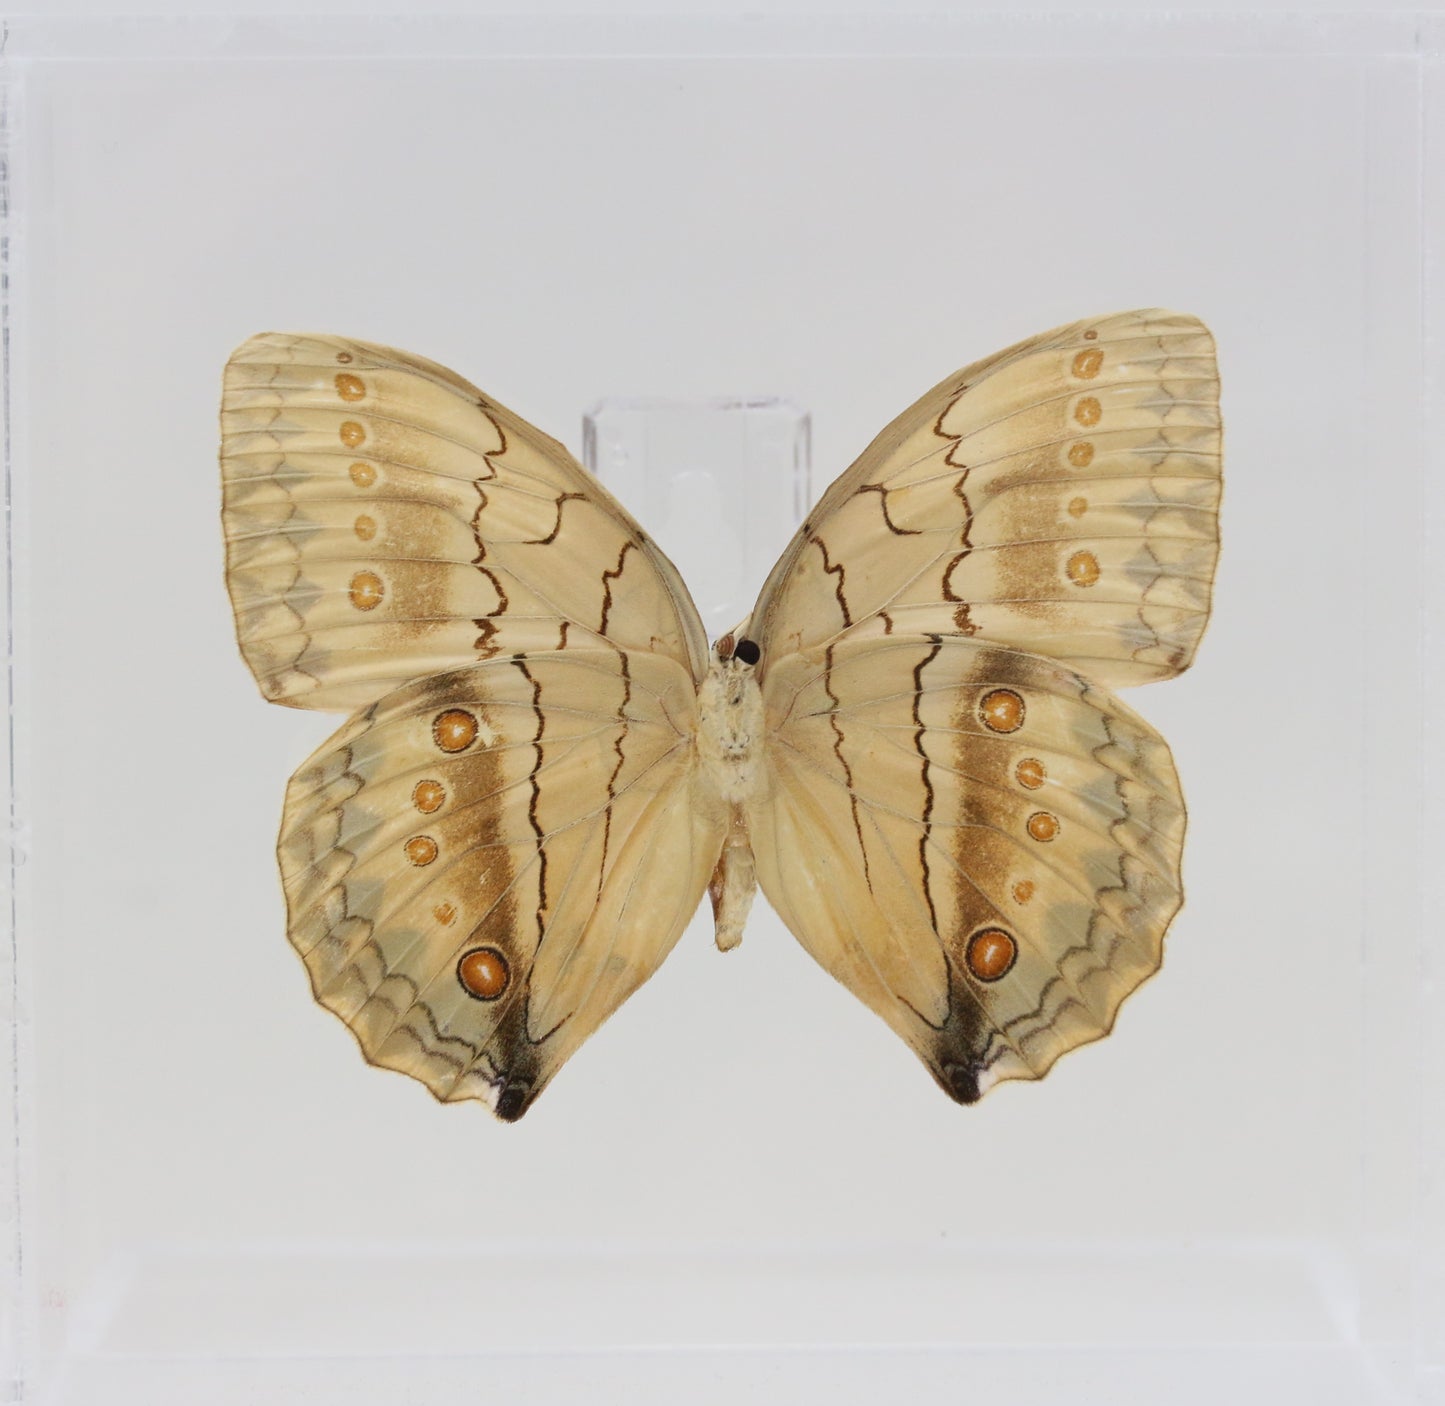 9060614 - Real Butterfly Acrylic Display Box - 6" X 6" - Howqua Jungle Queen Butterfly (Stichophthalma howqua) - Ventral